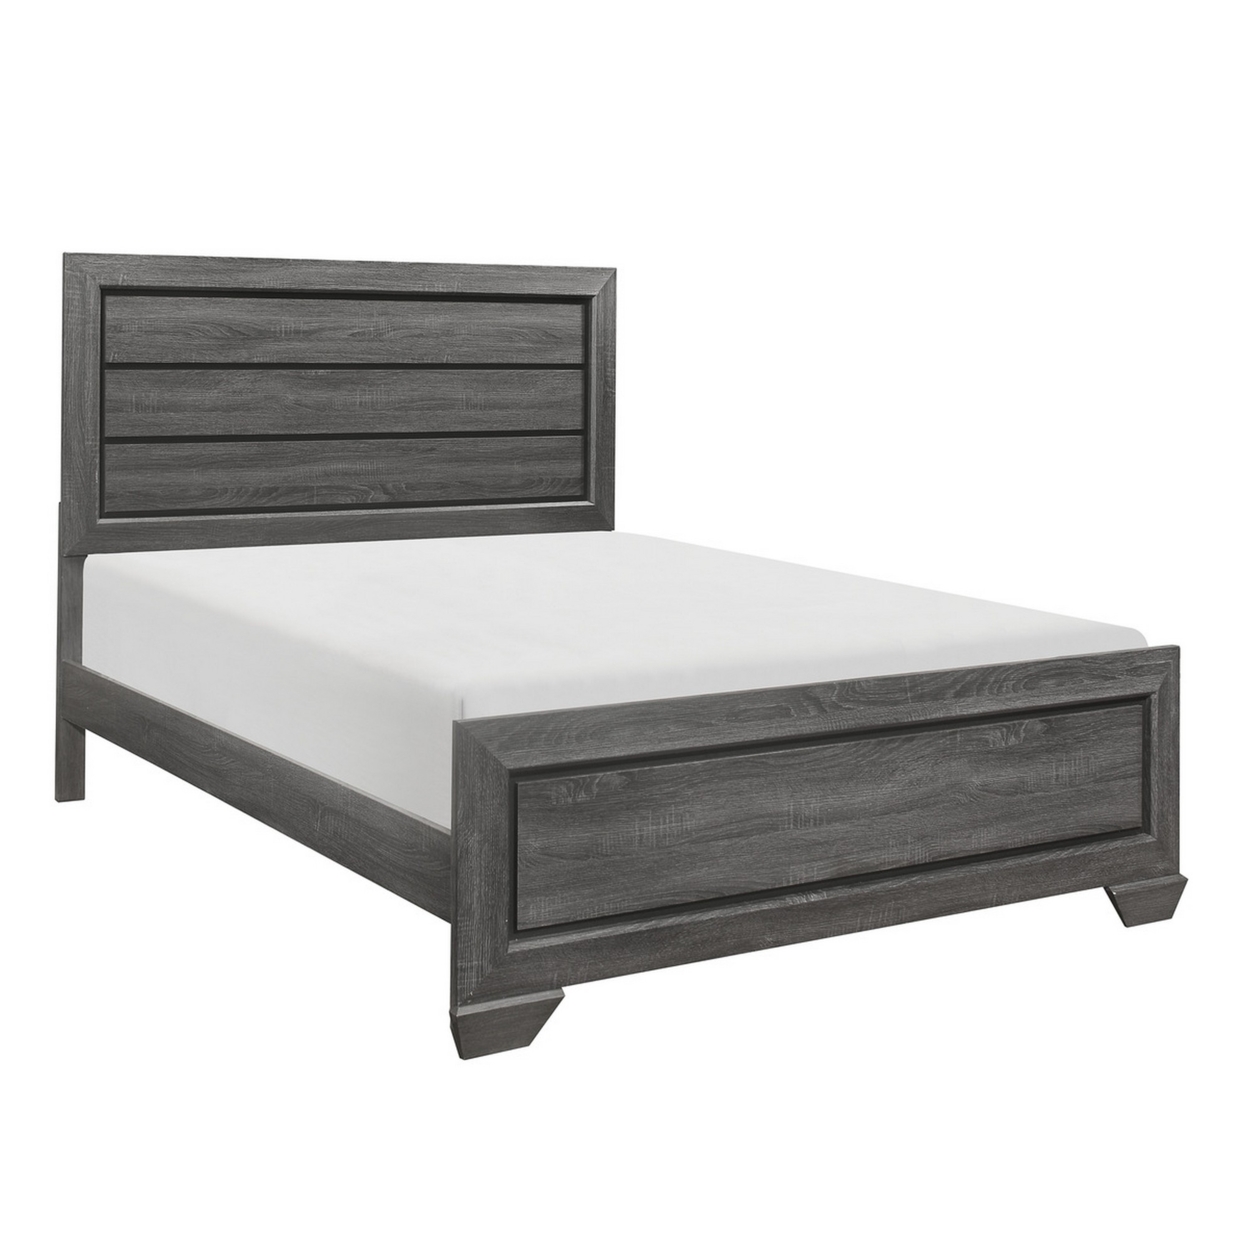 Erin Contemporary Queen Bed, Embossed Faux Wood Veneer, Smooth Gray Finish- Saltoro Sherpi